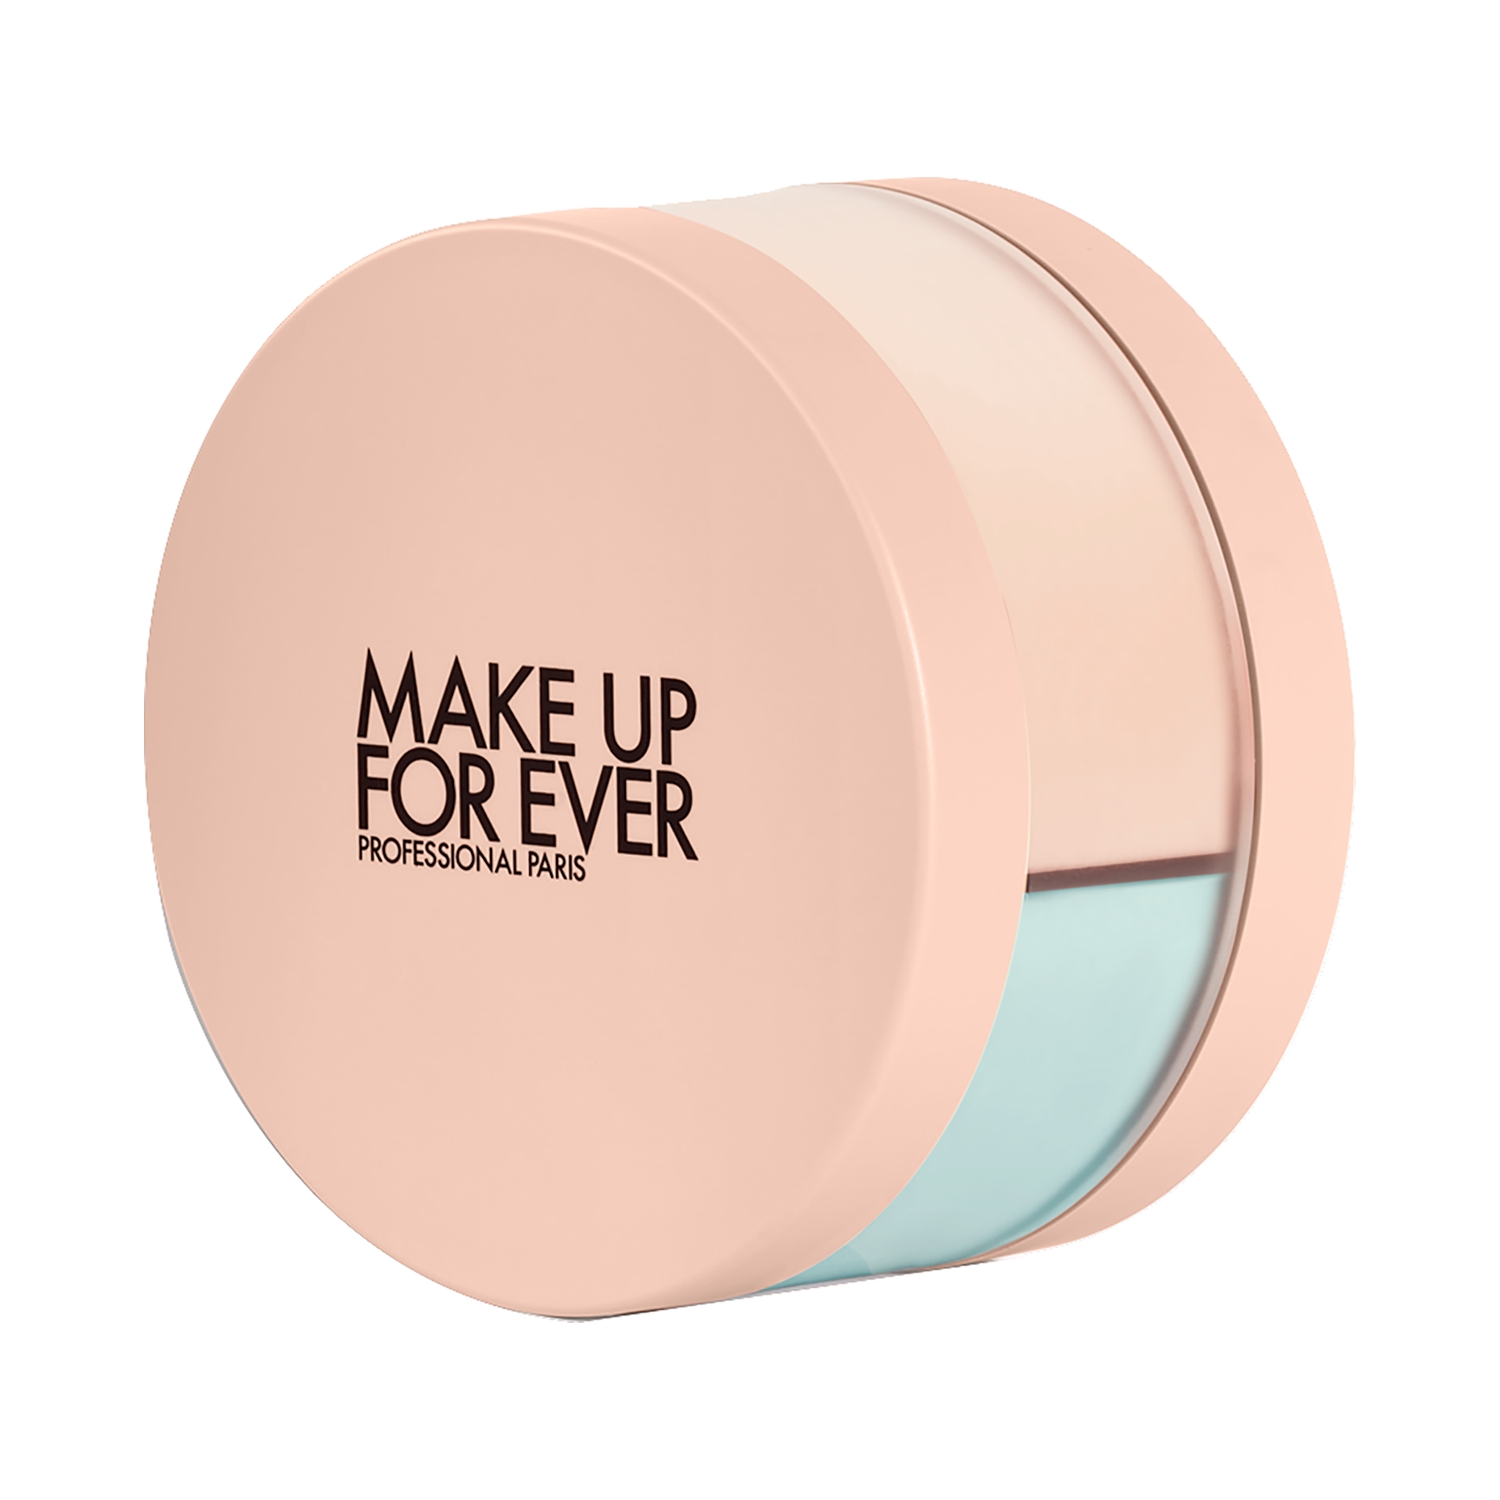 MAKE UP FOR EVER - Meet #aquaseal, magic item which designed to turn all  types of #makeup into #waterproof textures!#PROTIPS: mix your foundation  with a drop of Aqua Seal for more longlasting